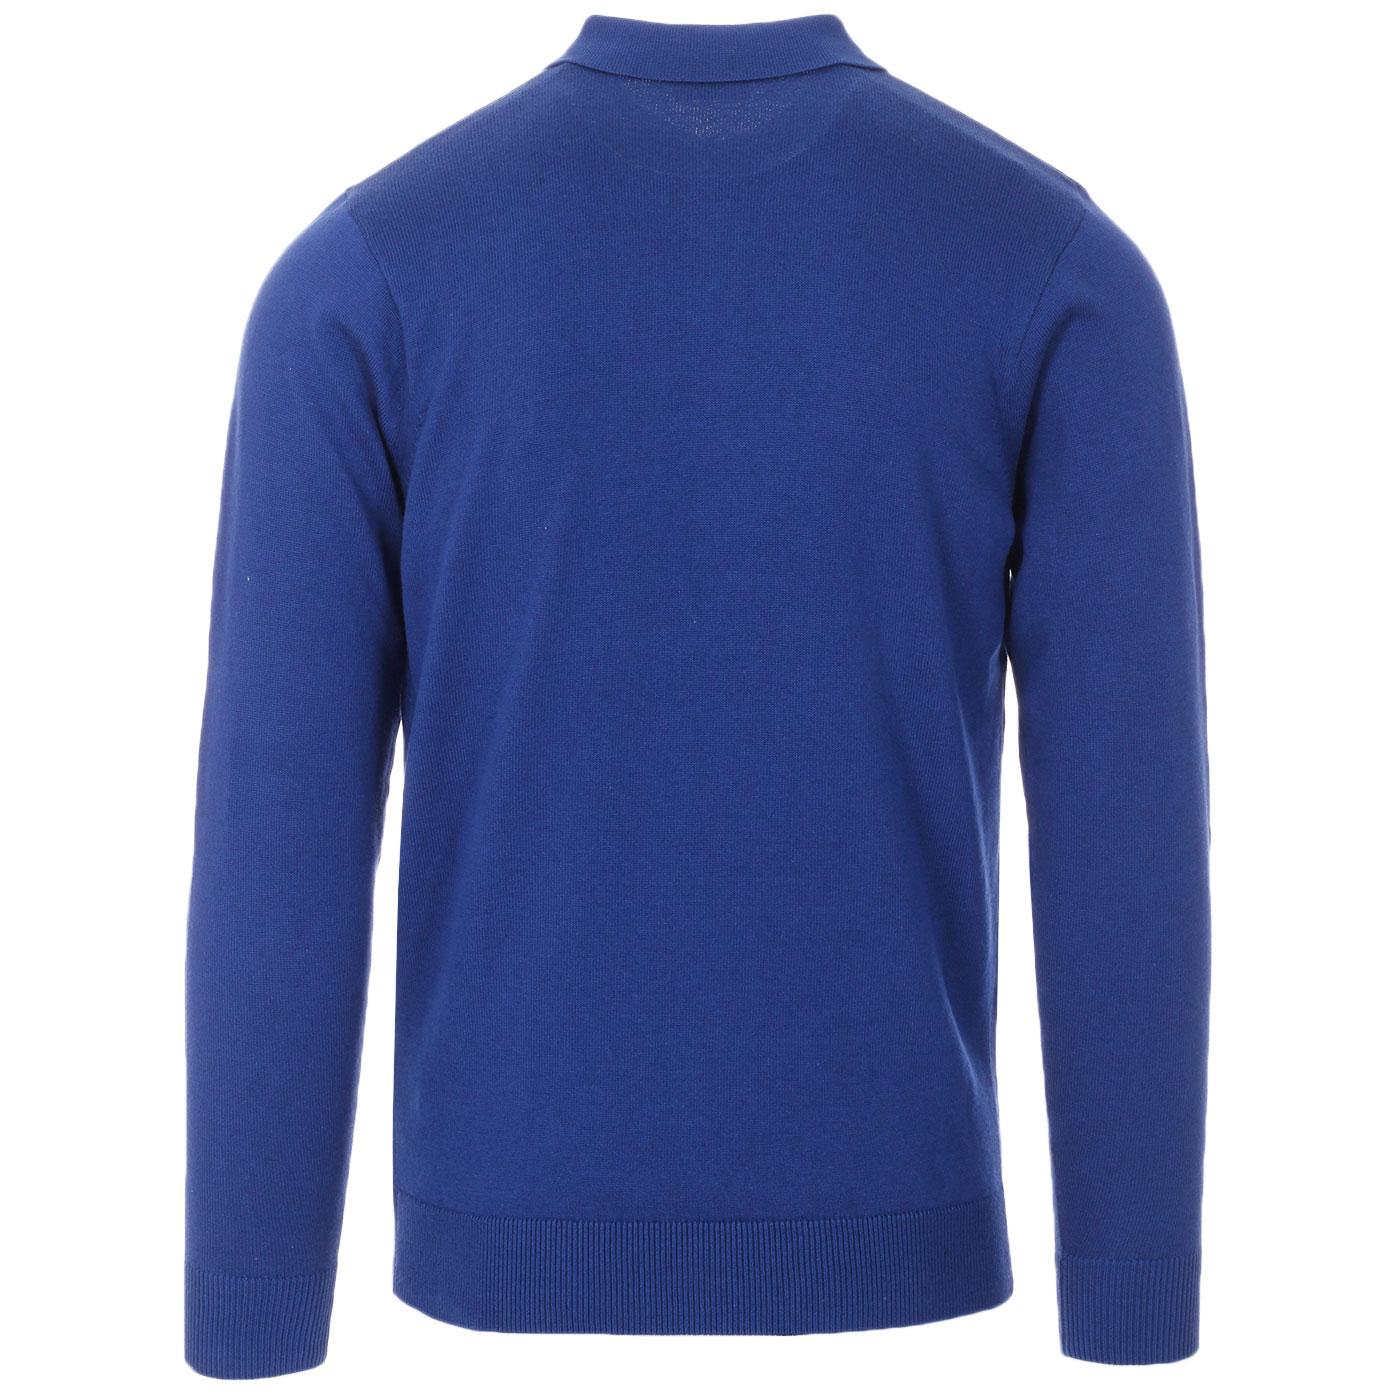 GABICCI VINTAGE Francesco Mod Knitted LS Polo in Pacific